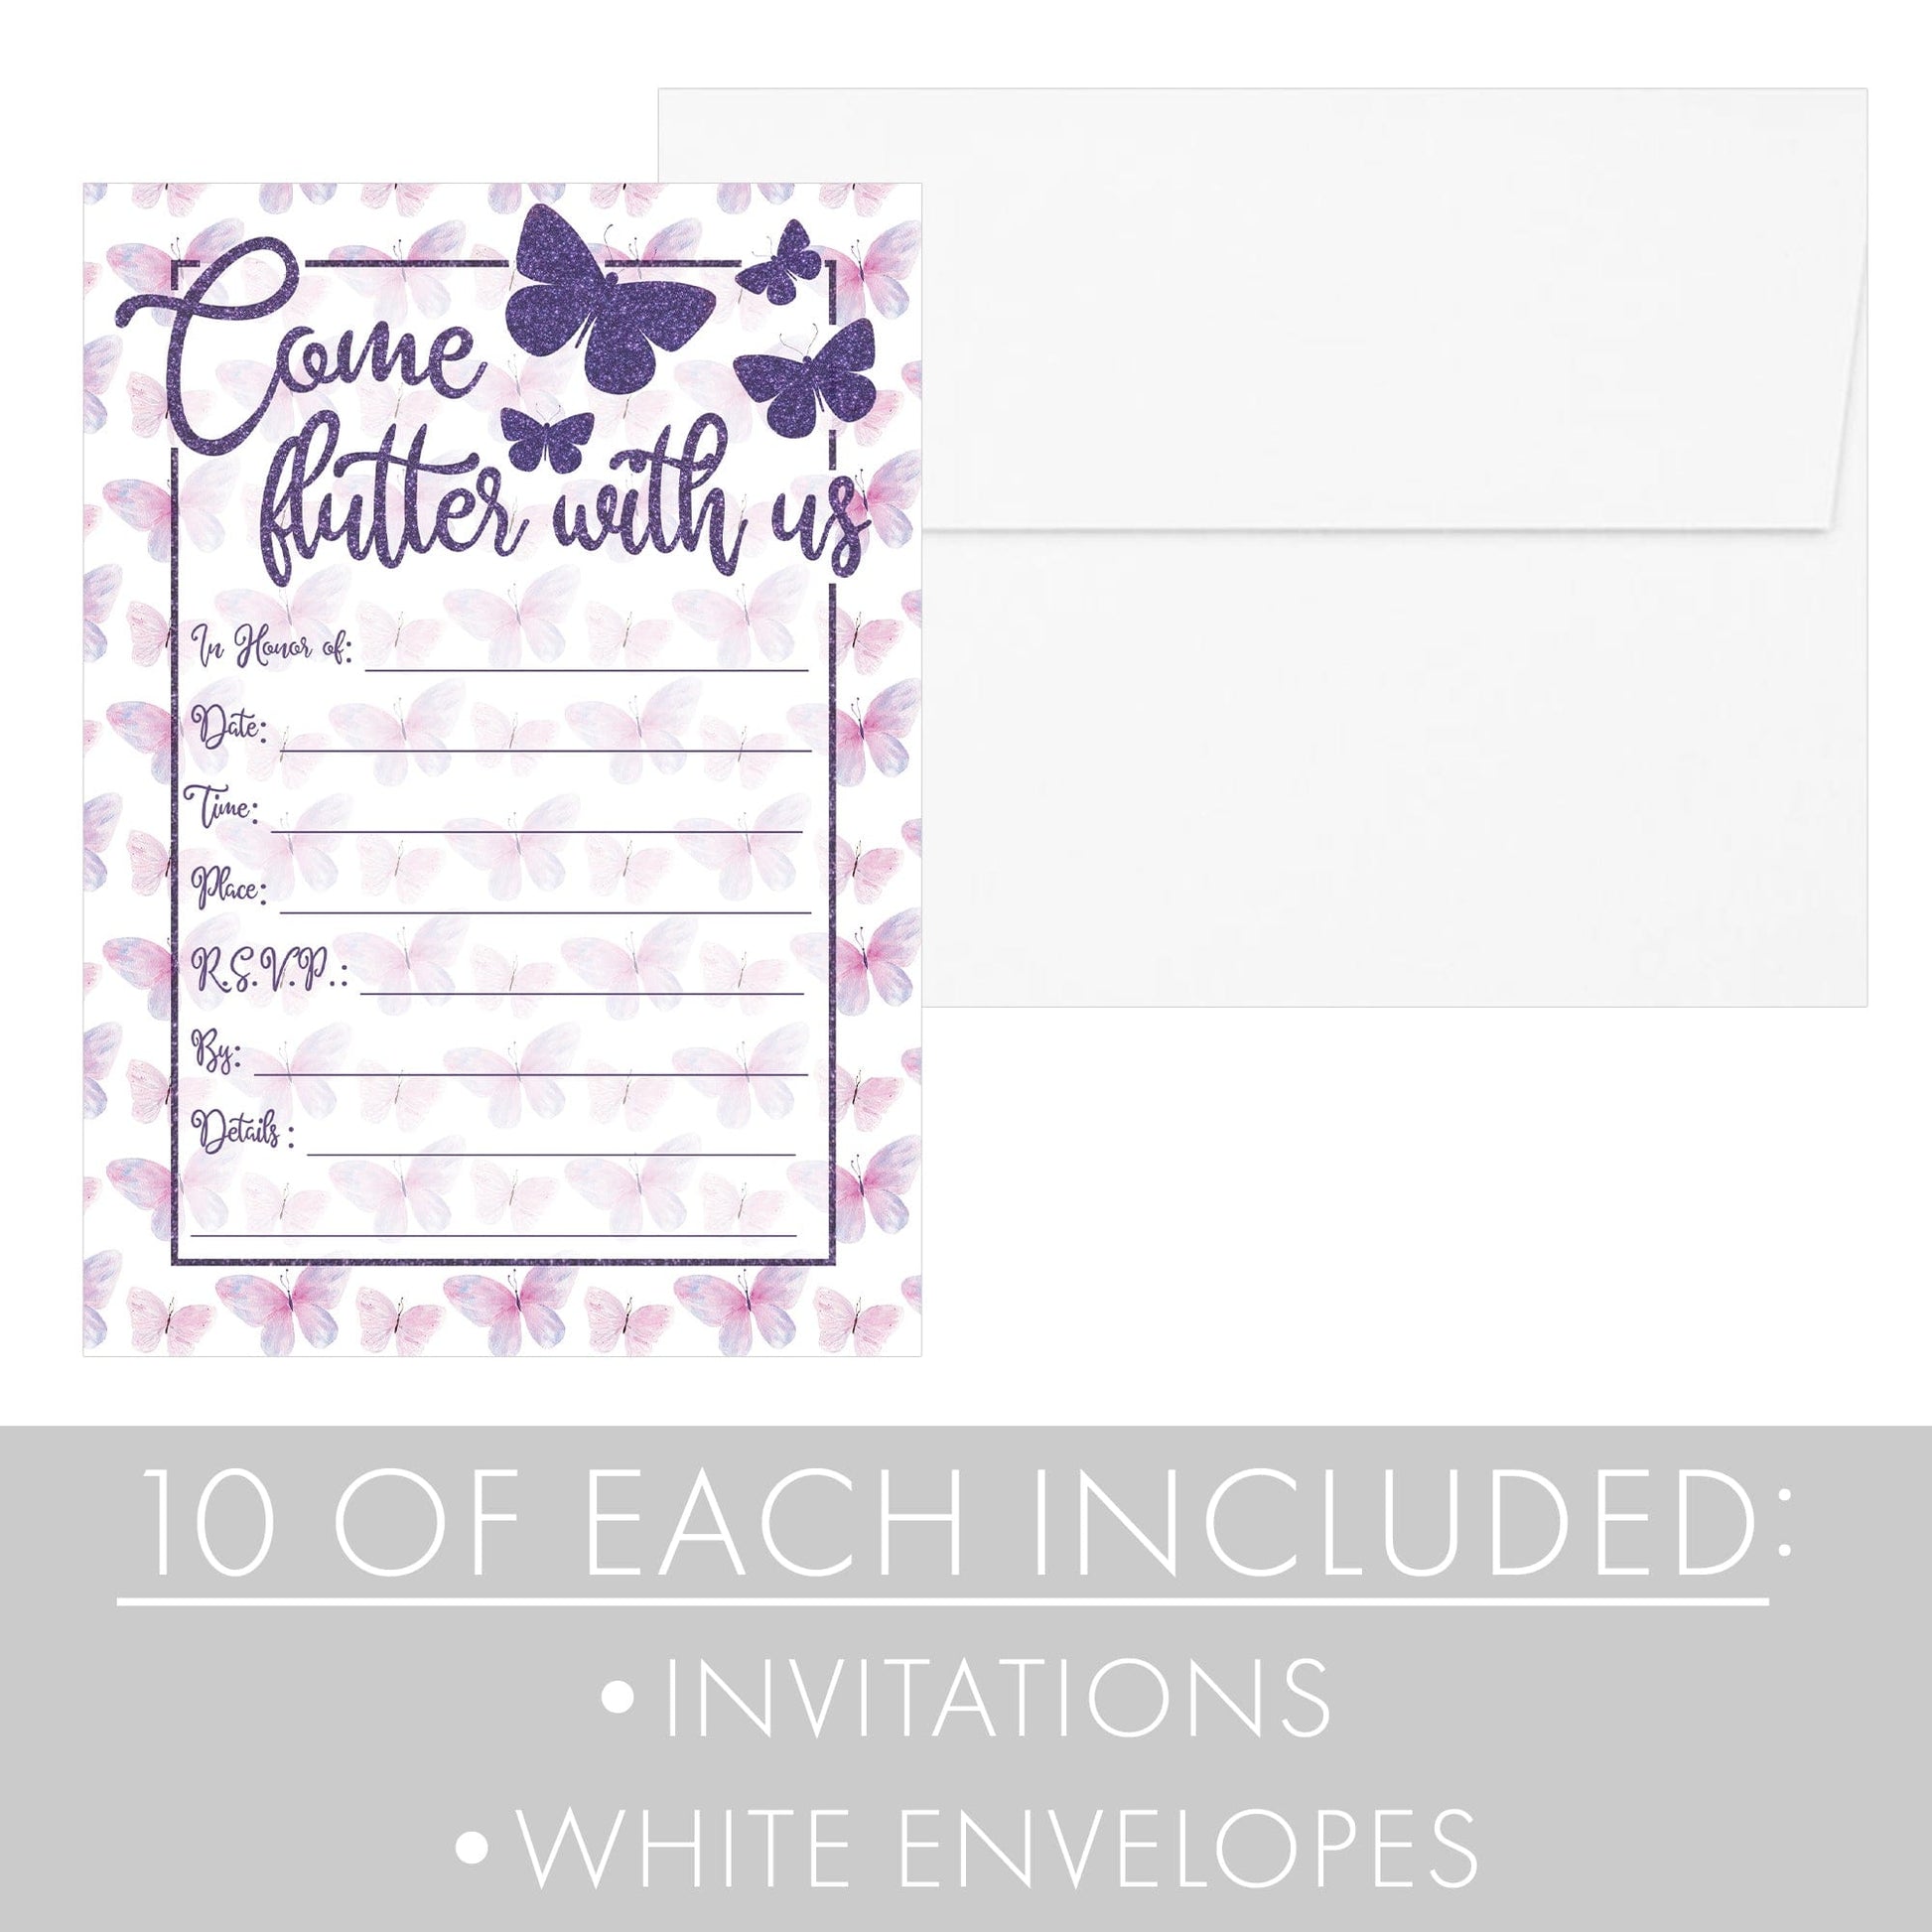 Butterfly Birthday Party Invitations - Purple Butterfly Wishes - 10 Cards with Envelopes